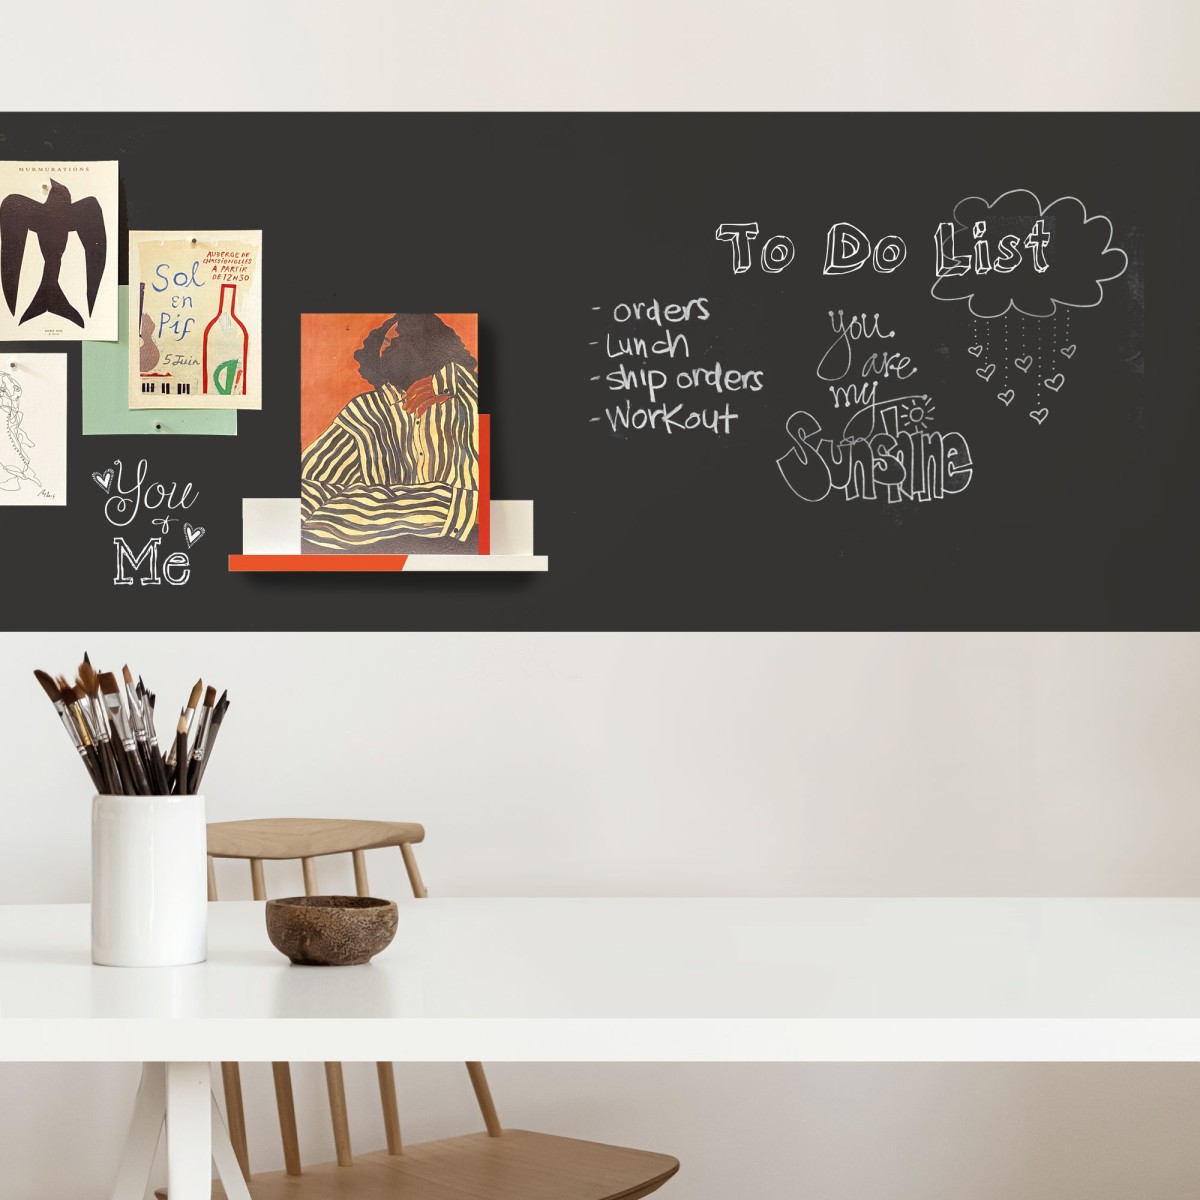 Chalkboard magnetic wallpaper by Groovy Magnets - easy to hang